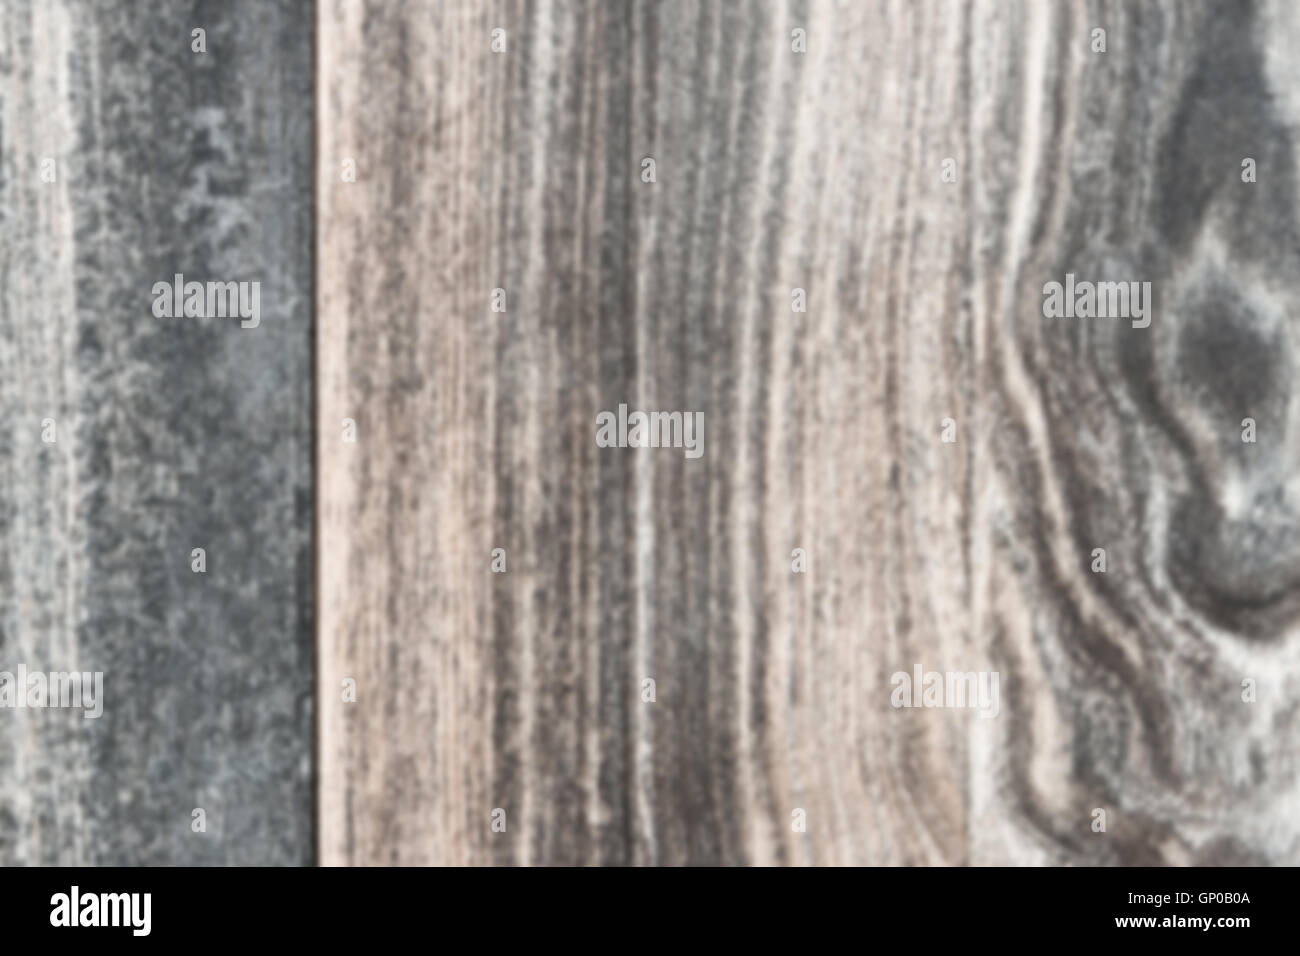 Blurry old wooden background Stock Photo